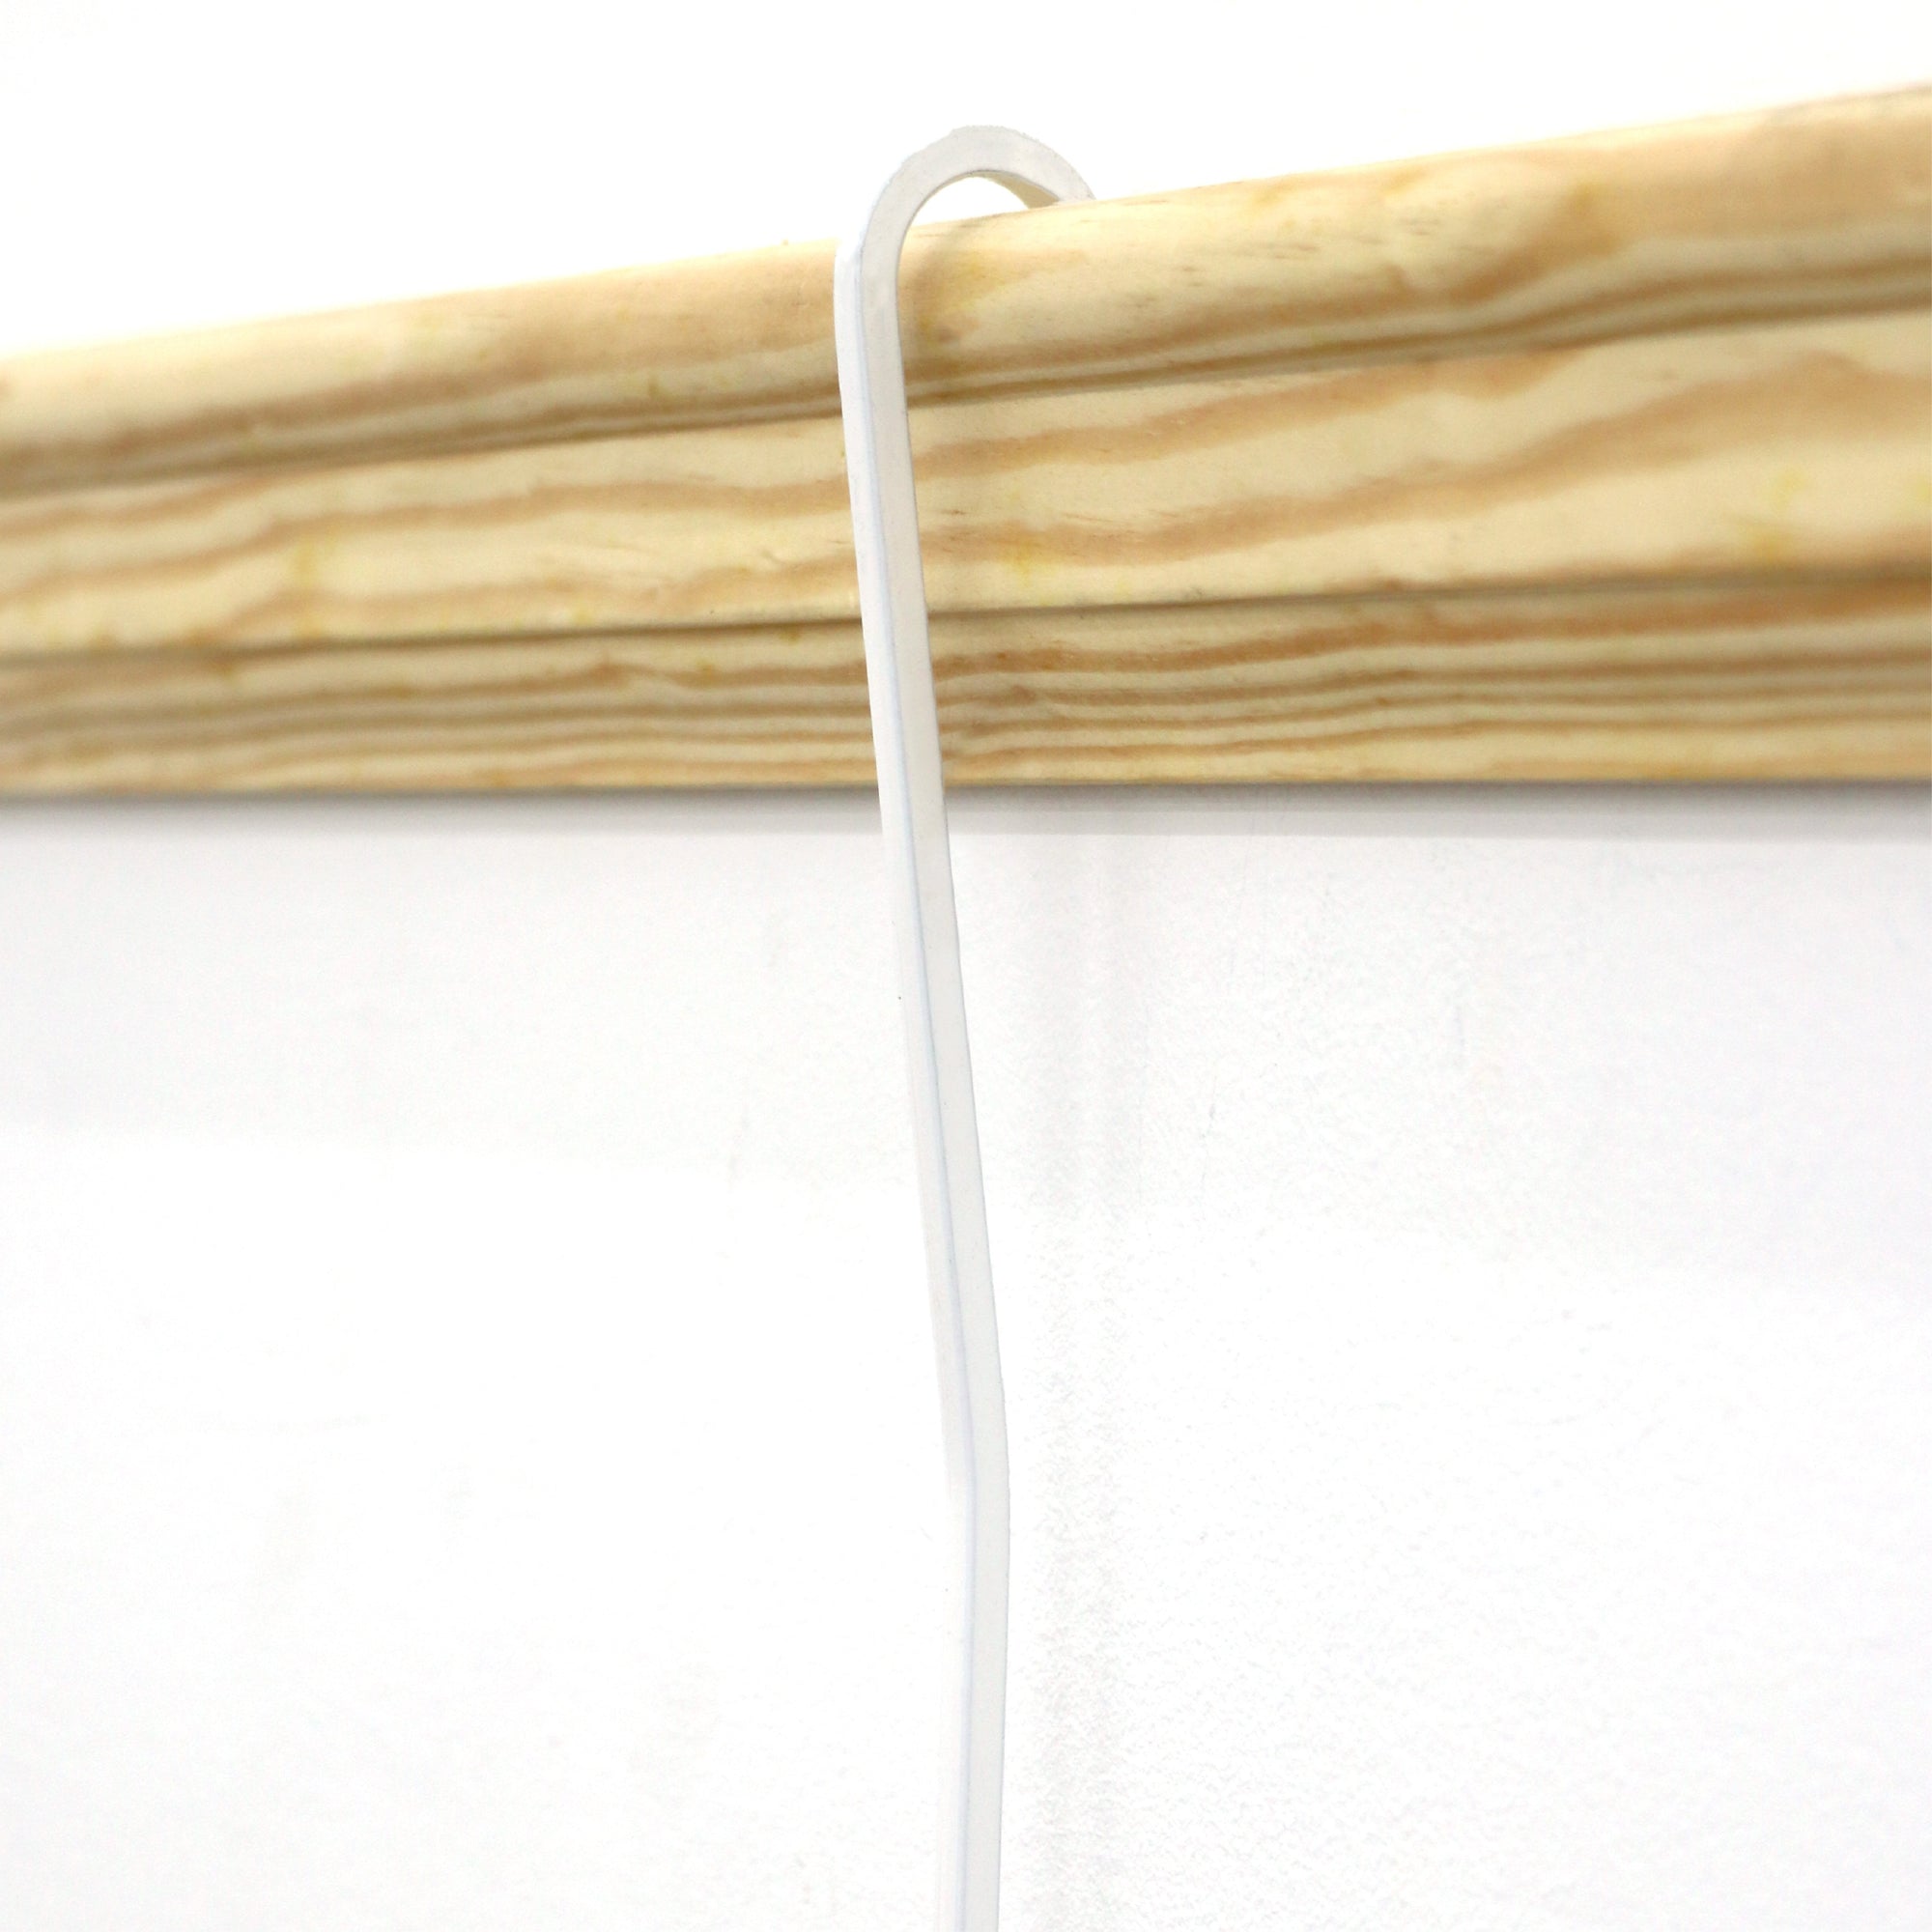 White Gallery Rod for Picture Rail Molding - 4 foot Rod for